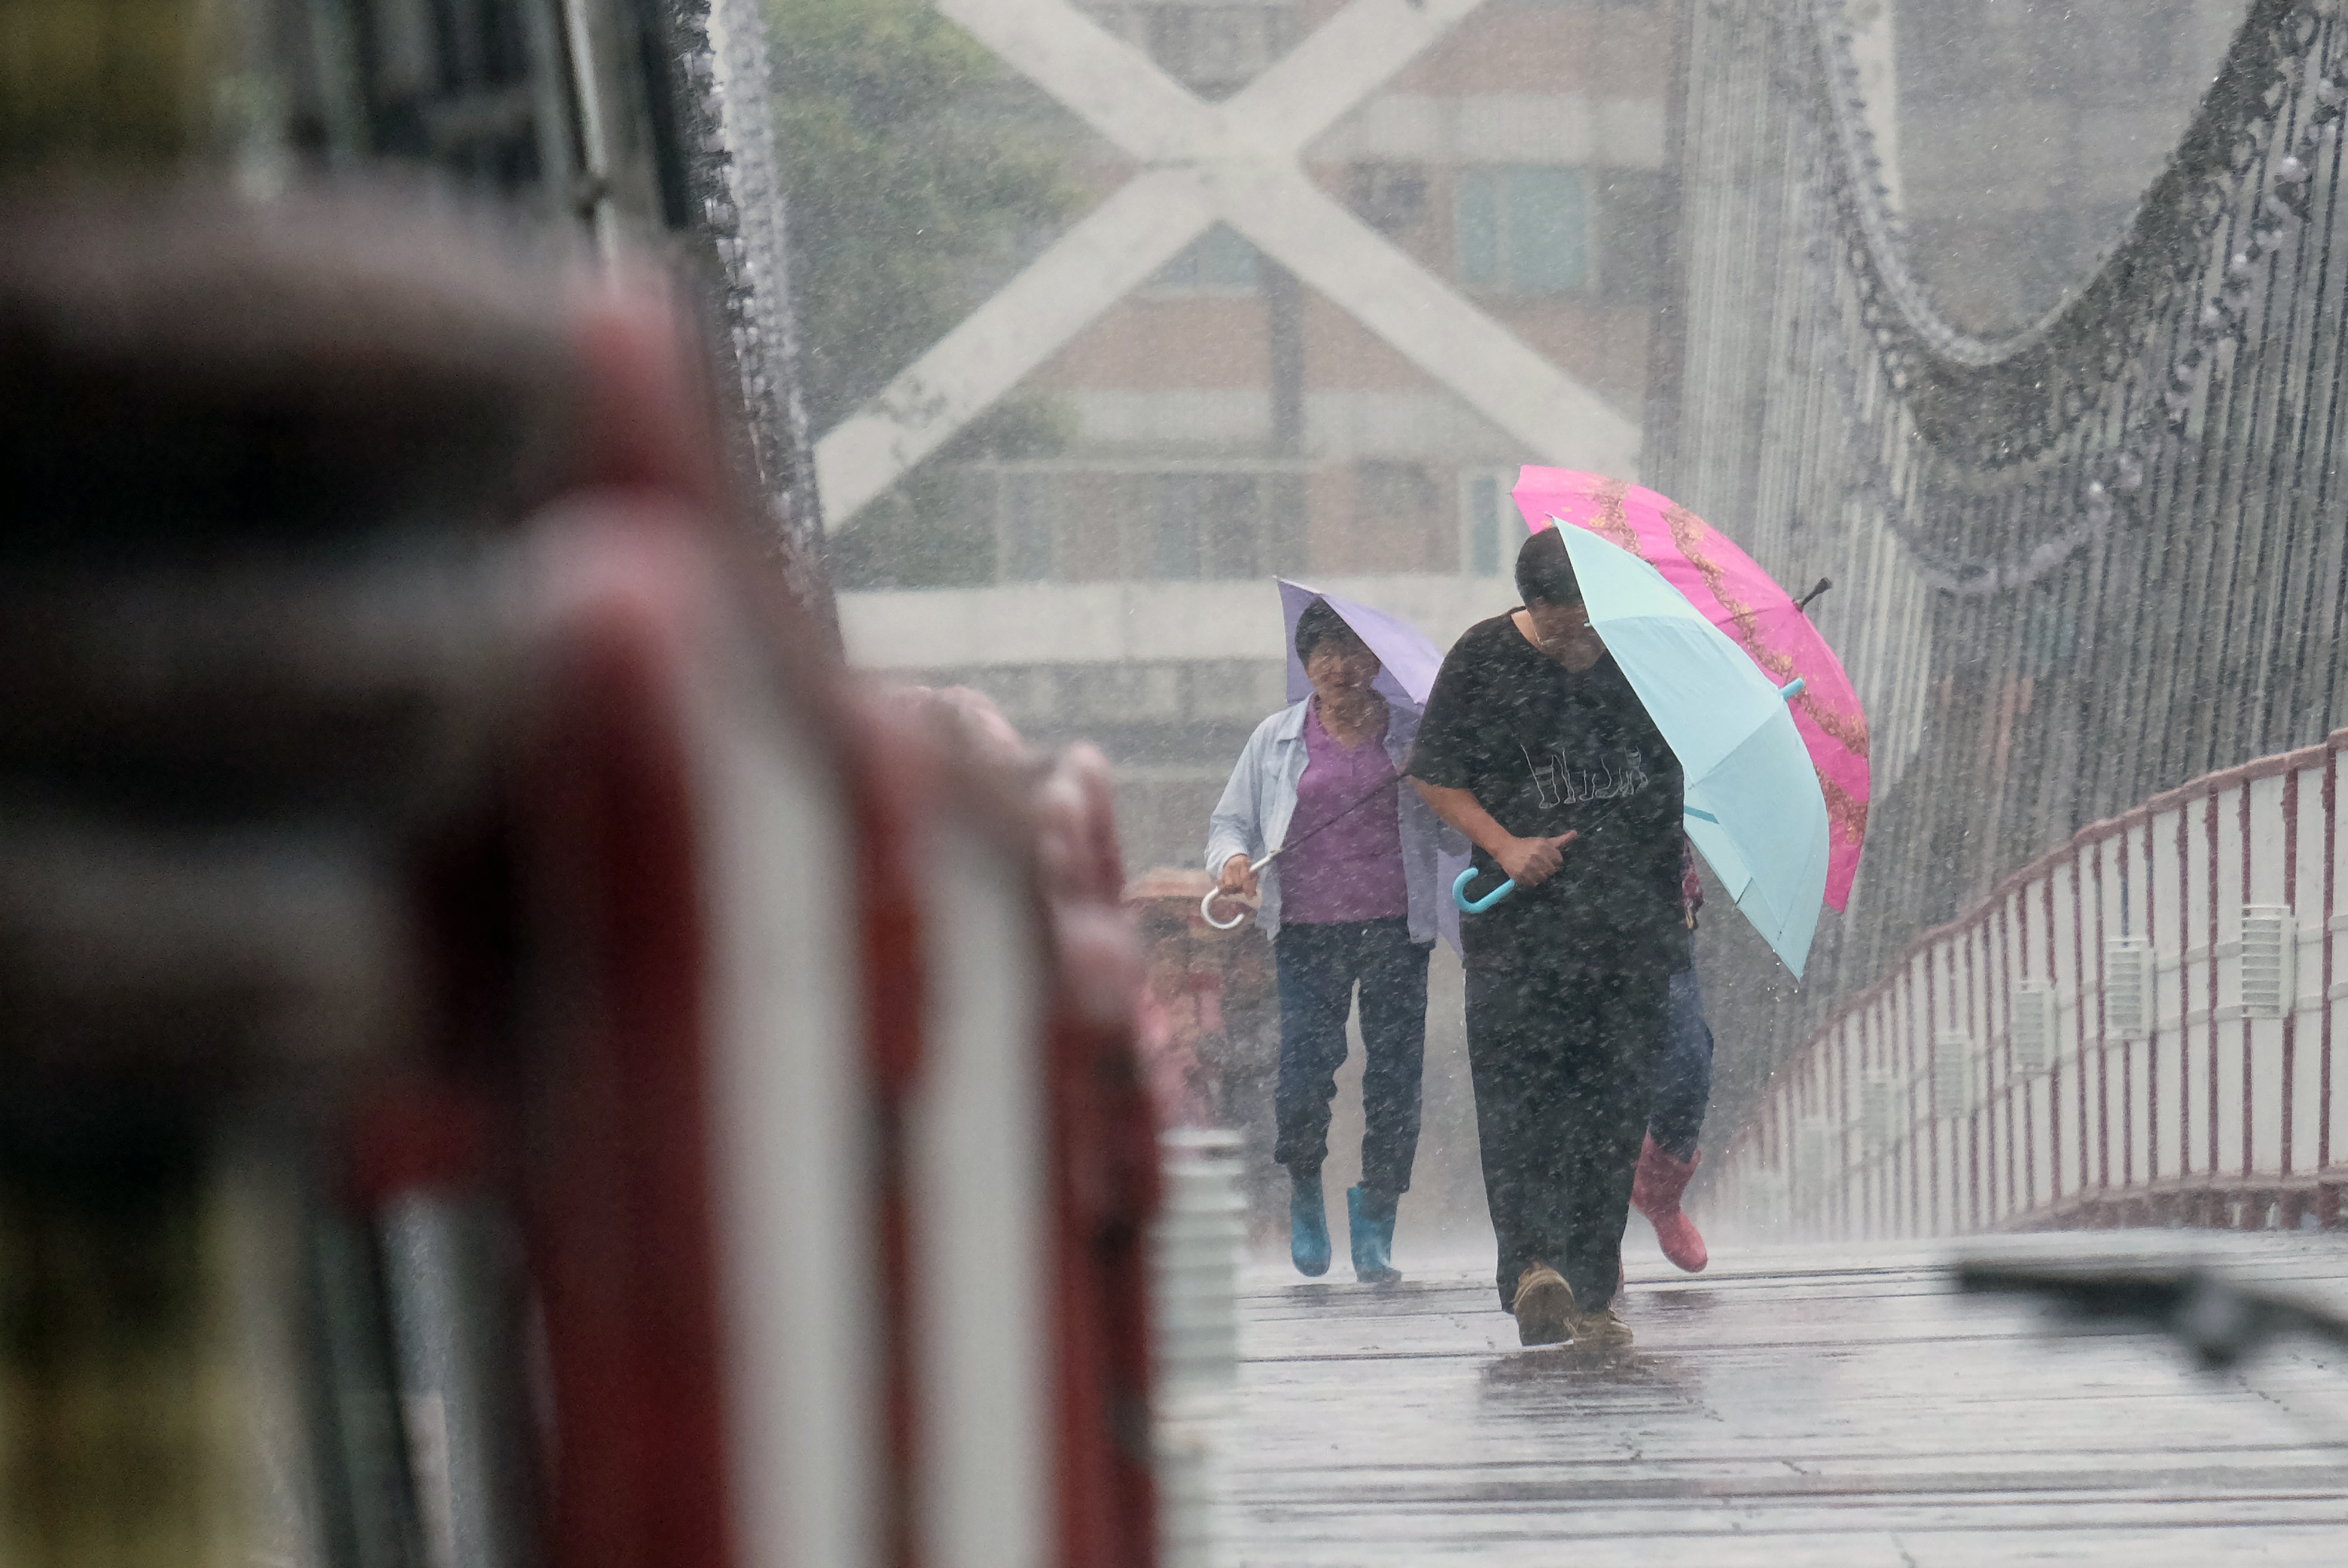 Local residents walk on a suspension bridge in Bitan in the New Taipei City, as Typhoon Megi approaching the east Taiwan on September 27, 2016.  Typhoon Megi churns towards Taiwan with powerful winds and rains in the third typhoon to hit the island in two weeks. / AFP PHOTO / SAM YEH